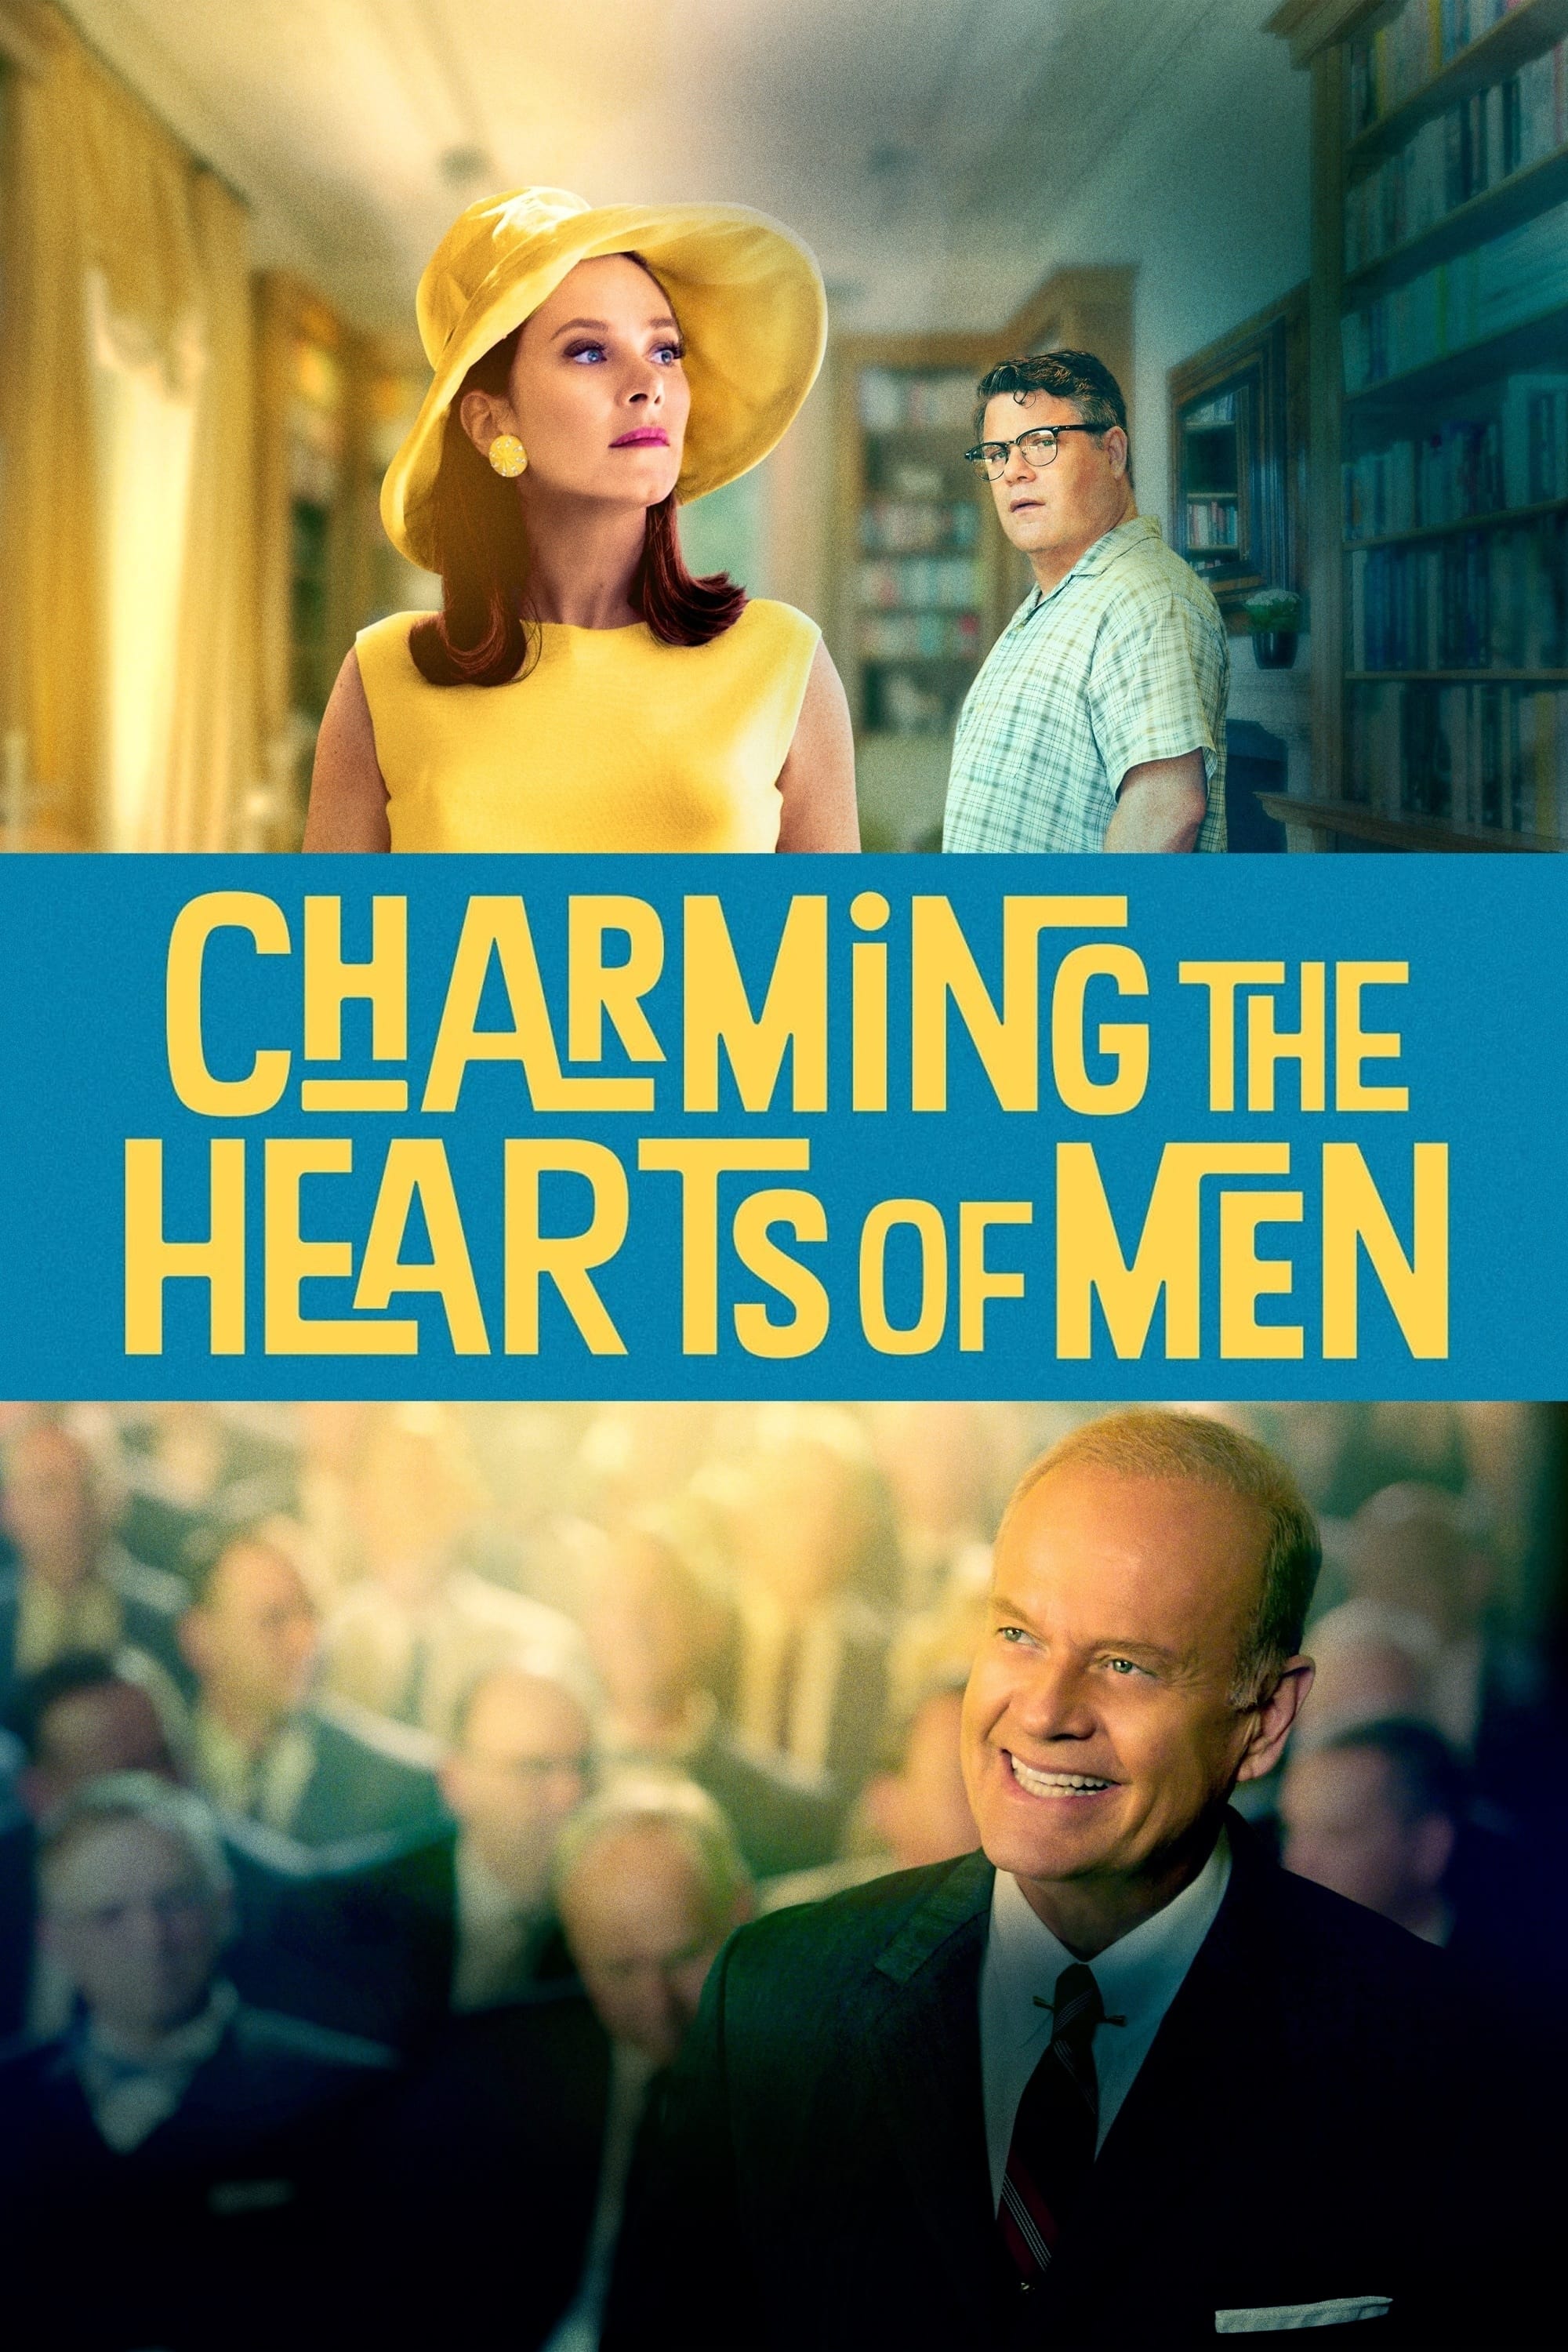 Charming the Hearts of Men (2020)